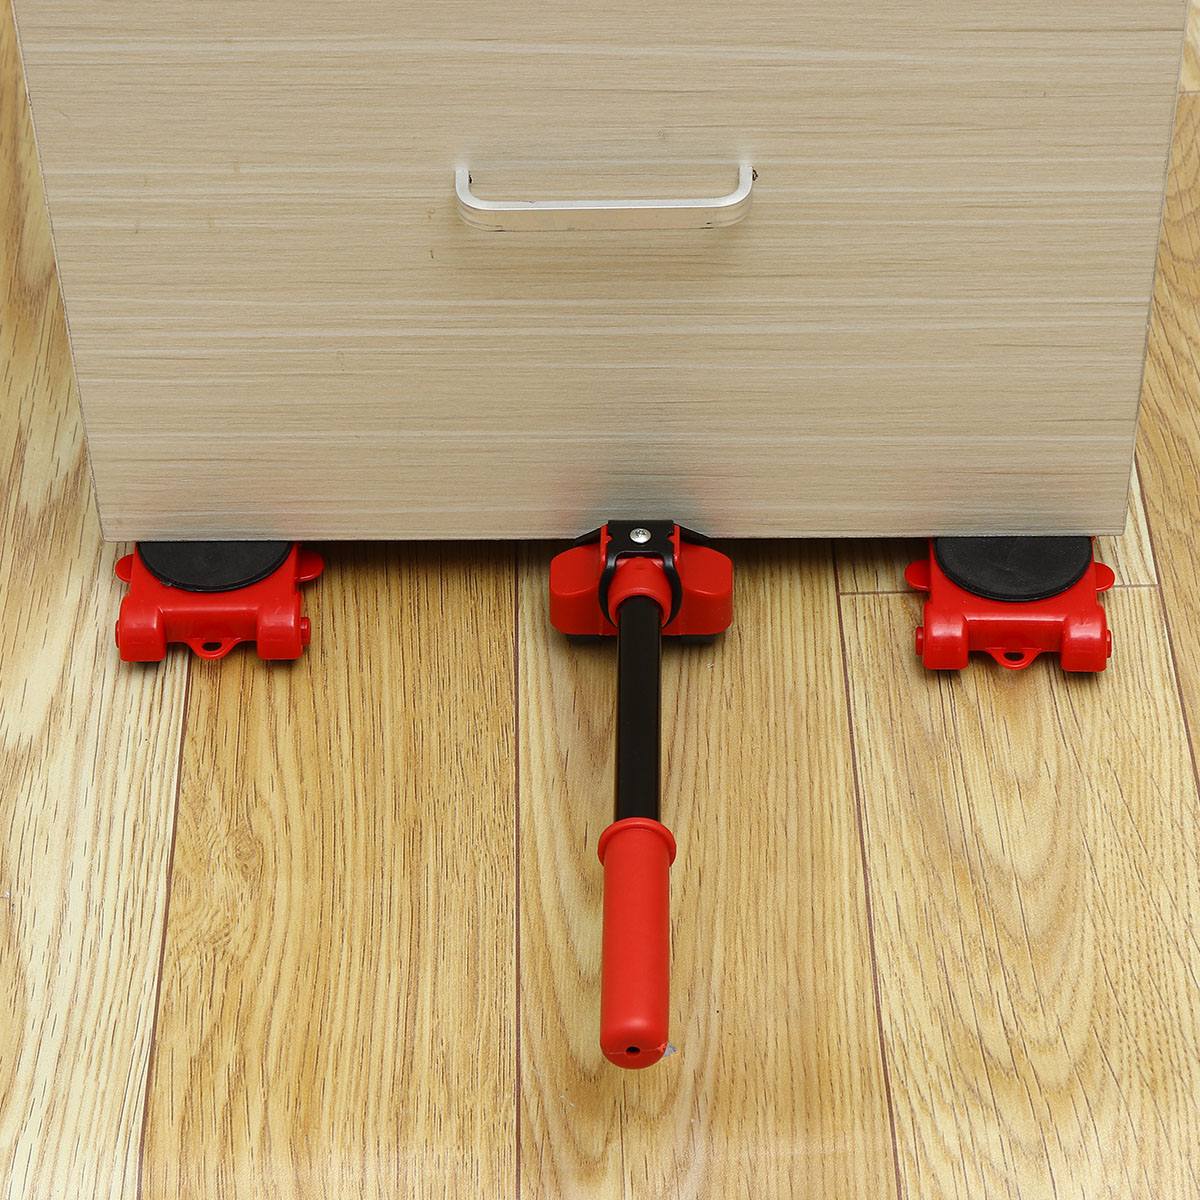 Heavy Objects Moving Tools Furniture Cargo Lifter Mover - Temu